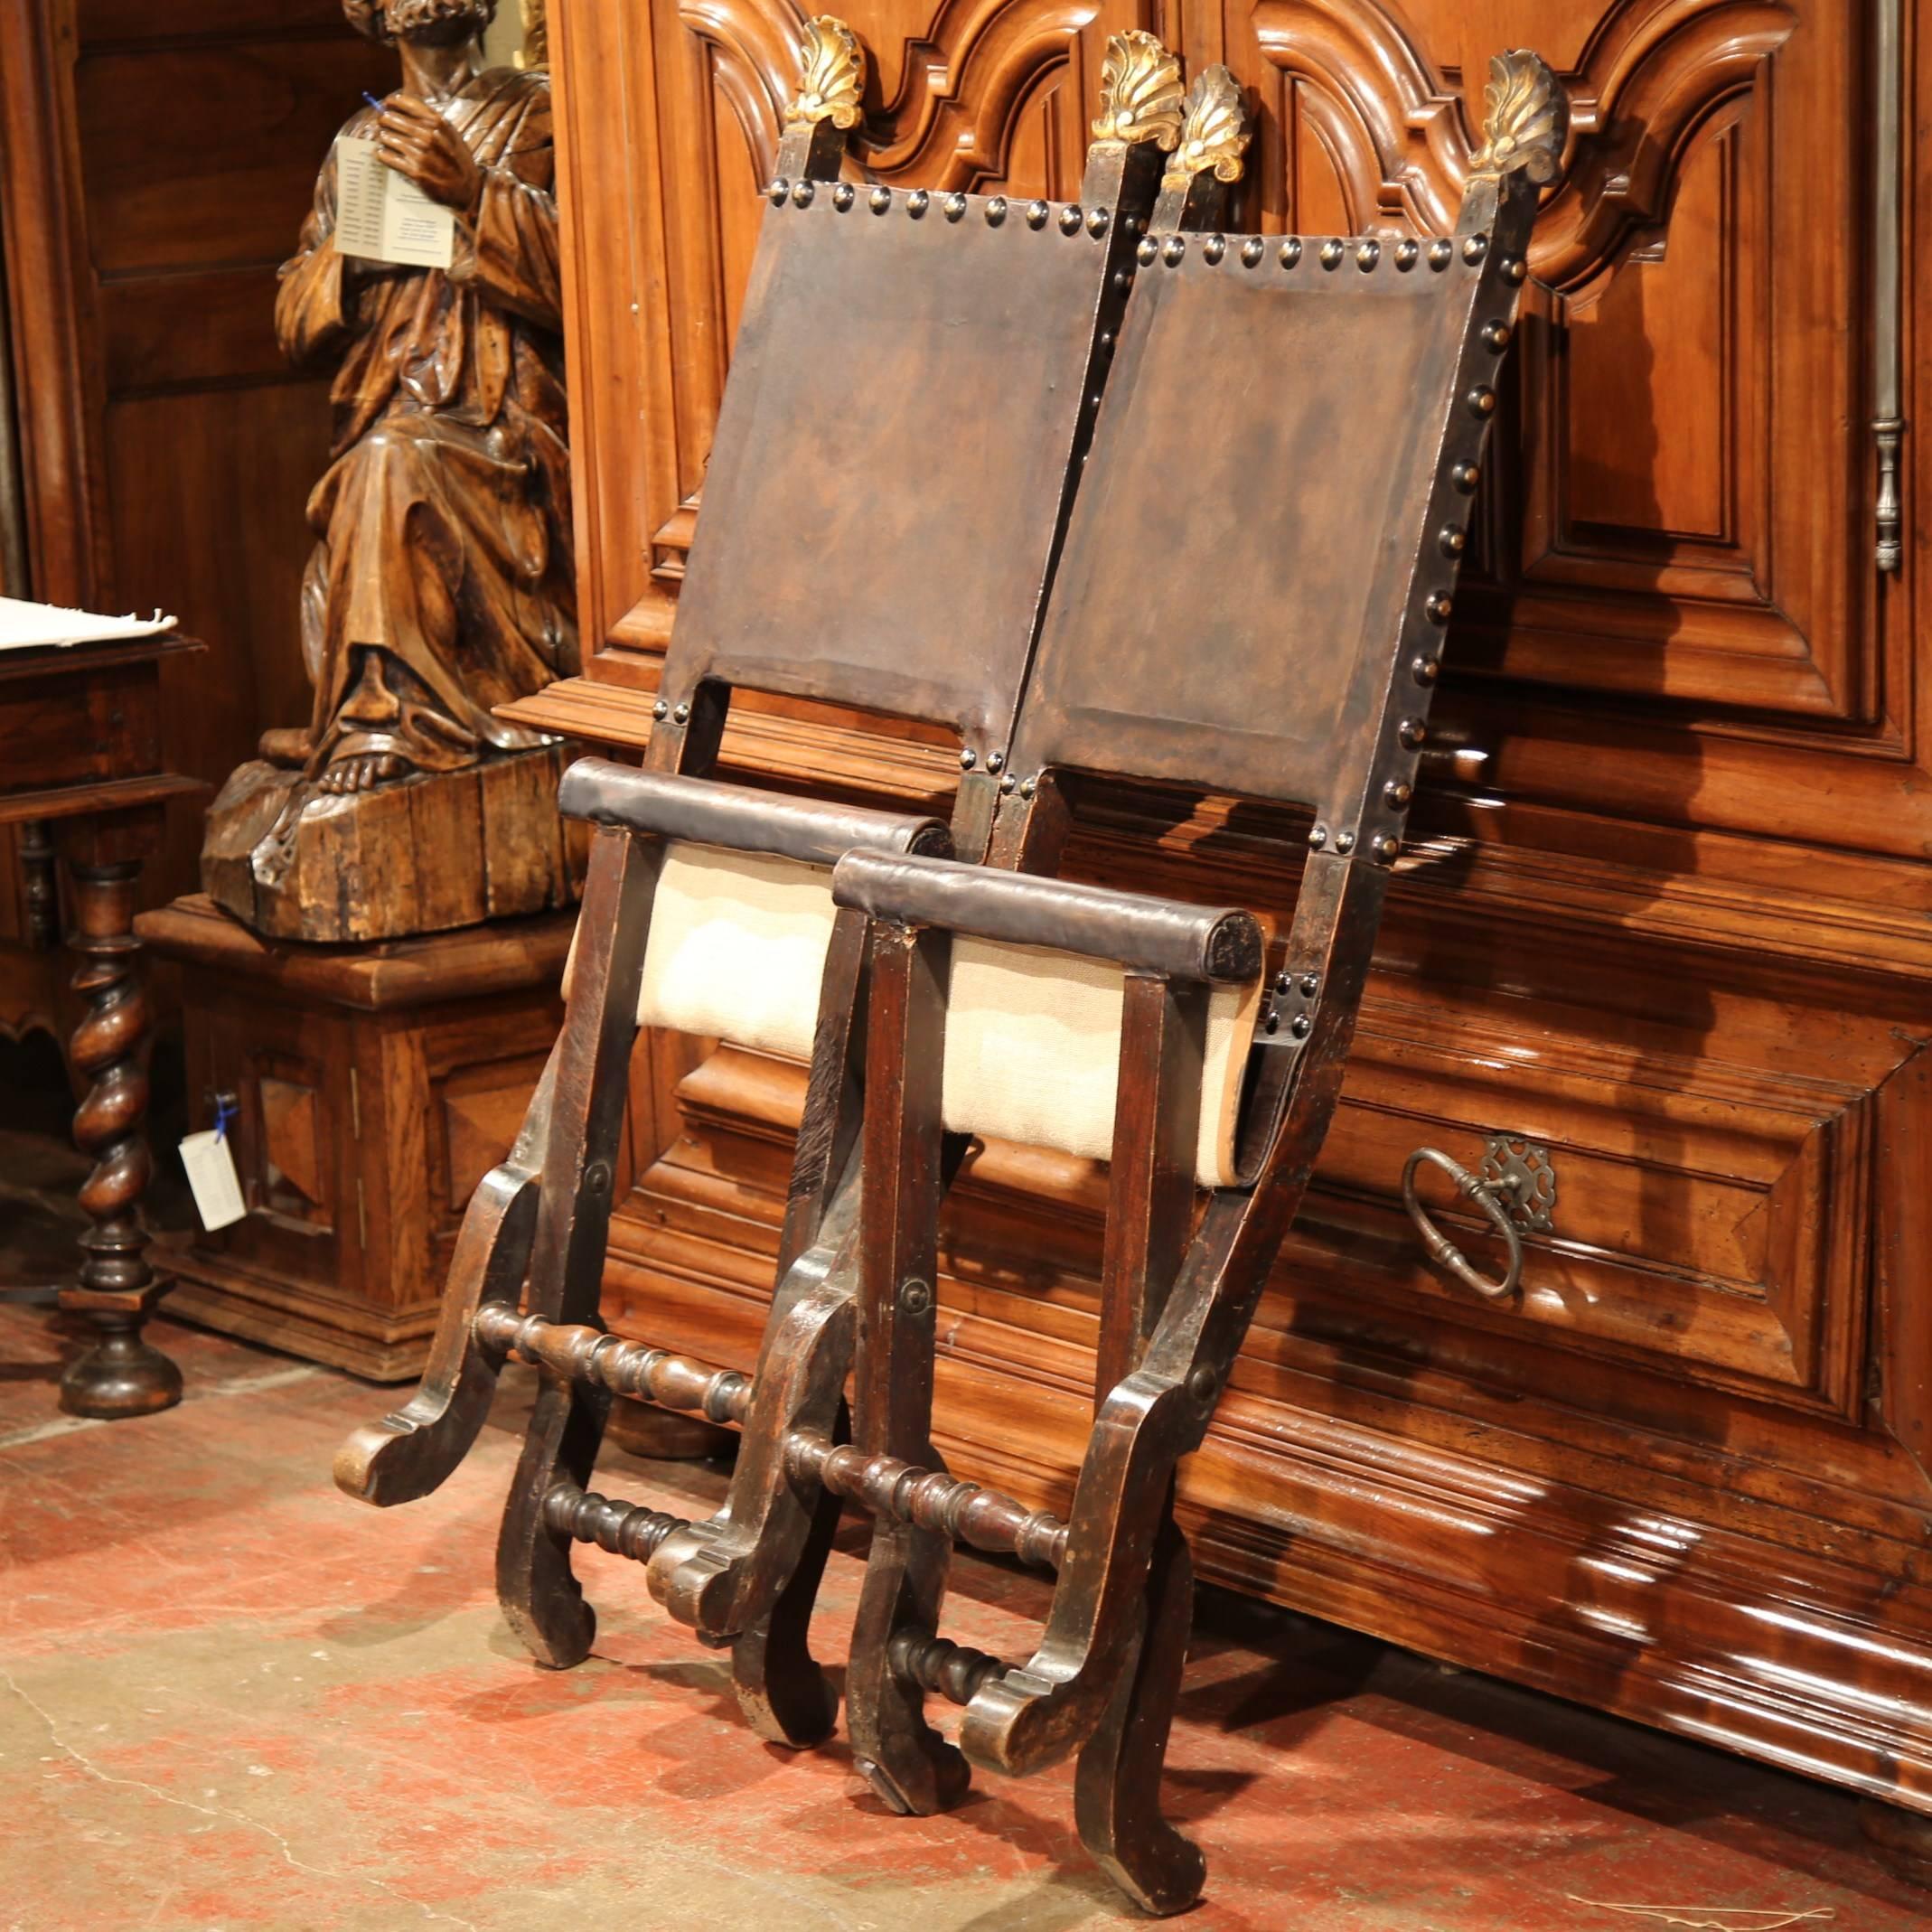 Hand-Carved Pair of 19th Century Spanish Carved Walnut Folding Chairs with Original Leather